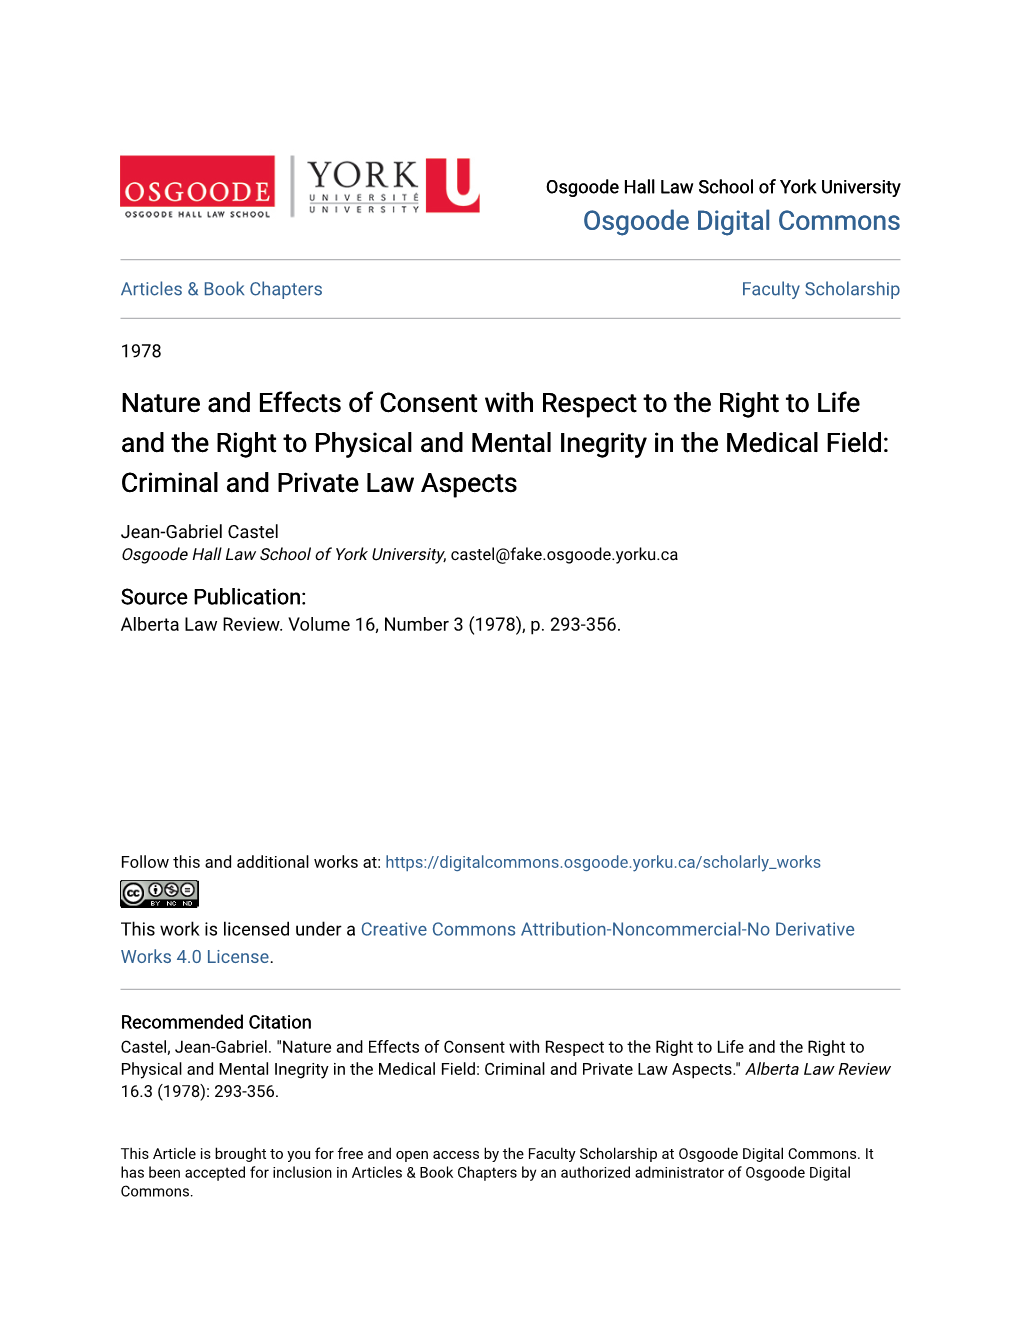 Nature and Effects of Consent with Respect to the Right to Life and the Right to Physical and Mental Inegrity in the Medical Field: Criminal and Private Law Aspects